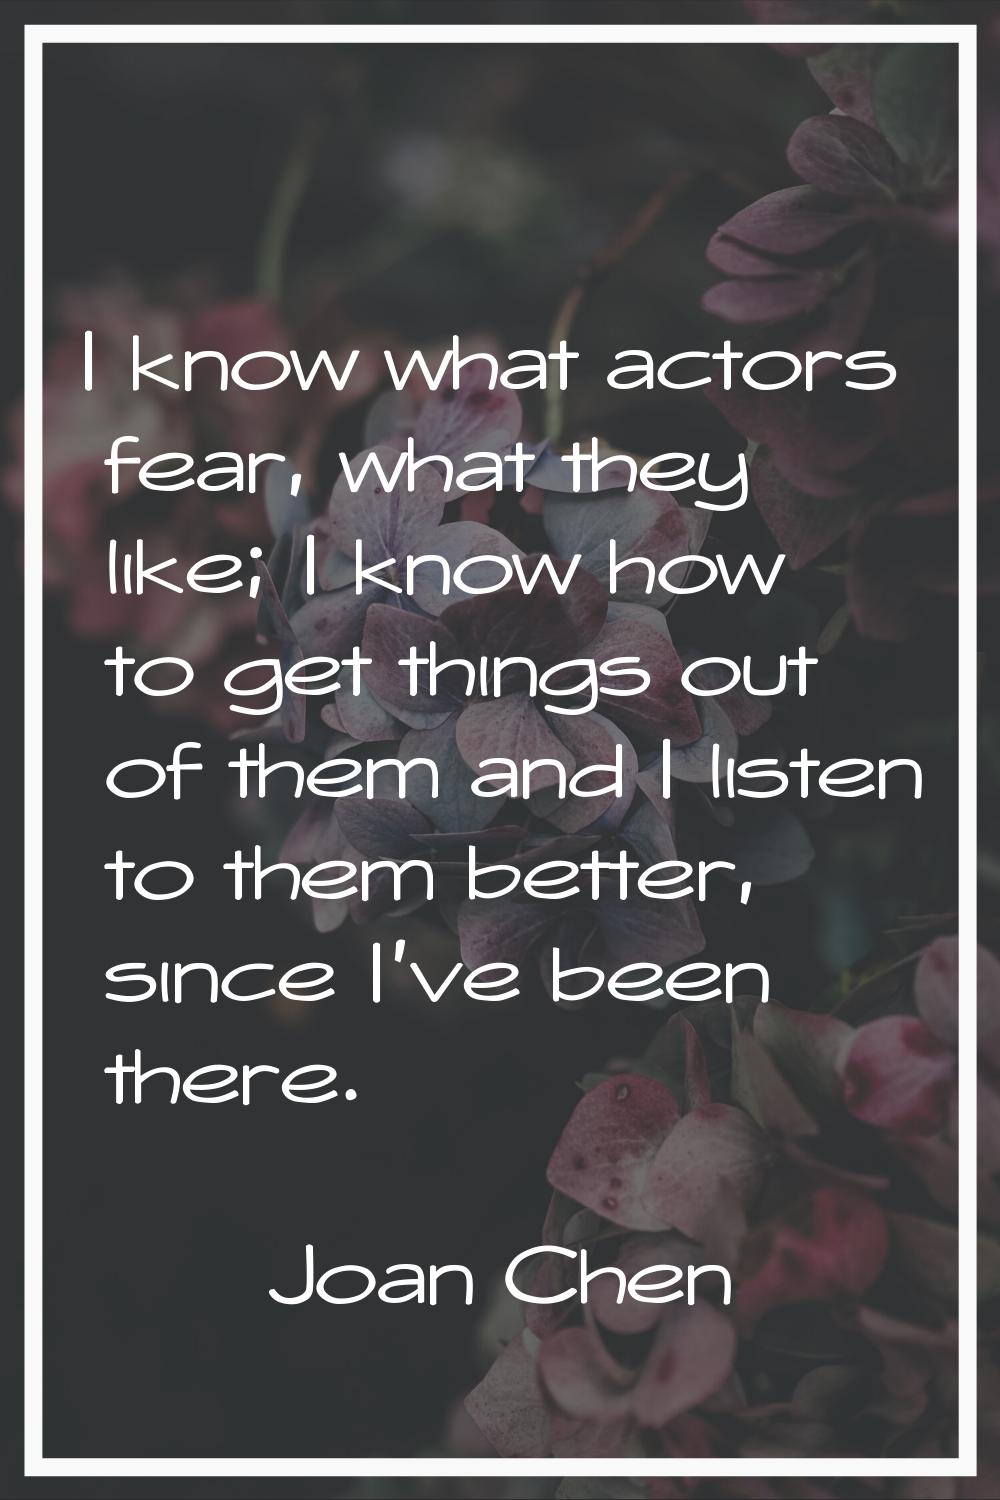 I know what actors fear, what they like; I know how to get things out of them and I listen to them 